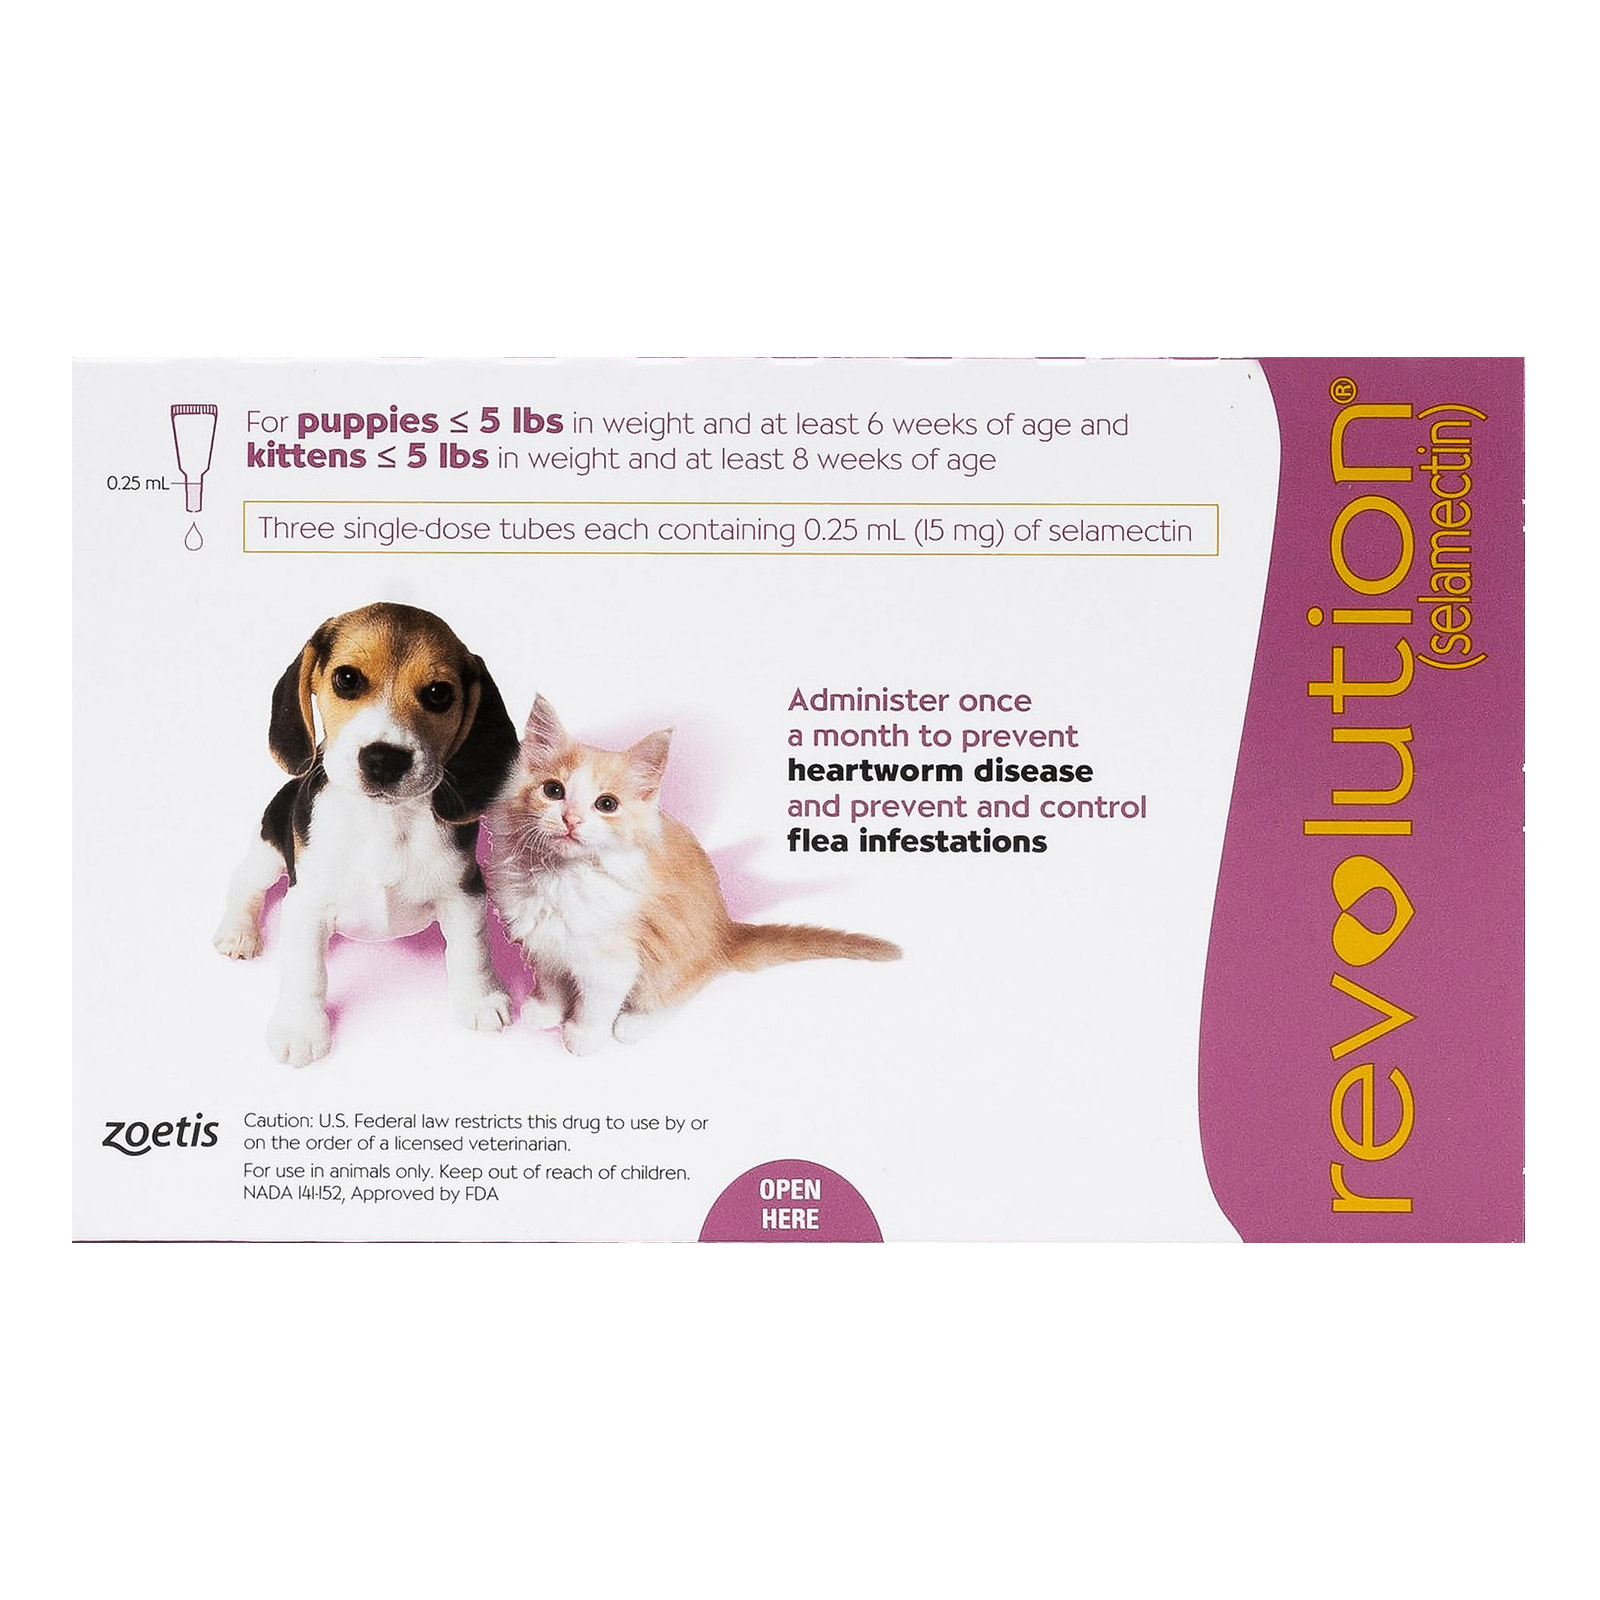 Revolution For Kittens / Puppies Pink 6 Doses